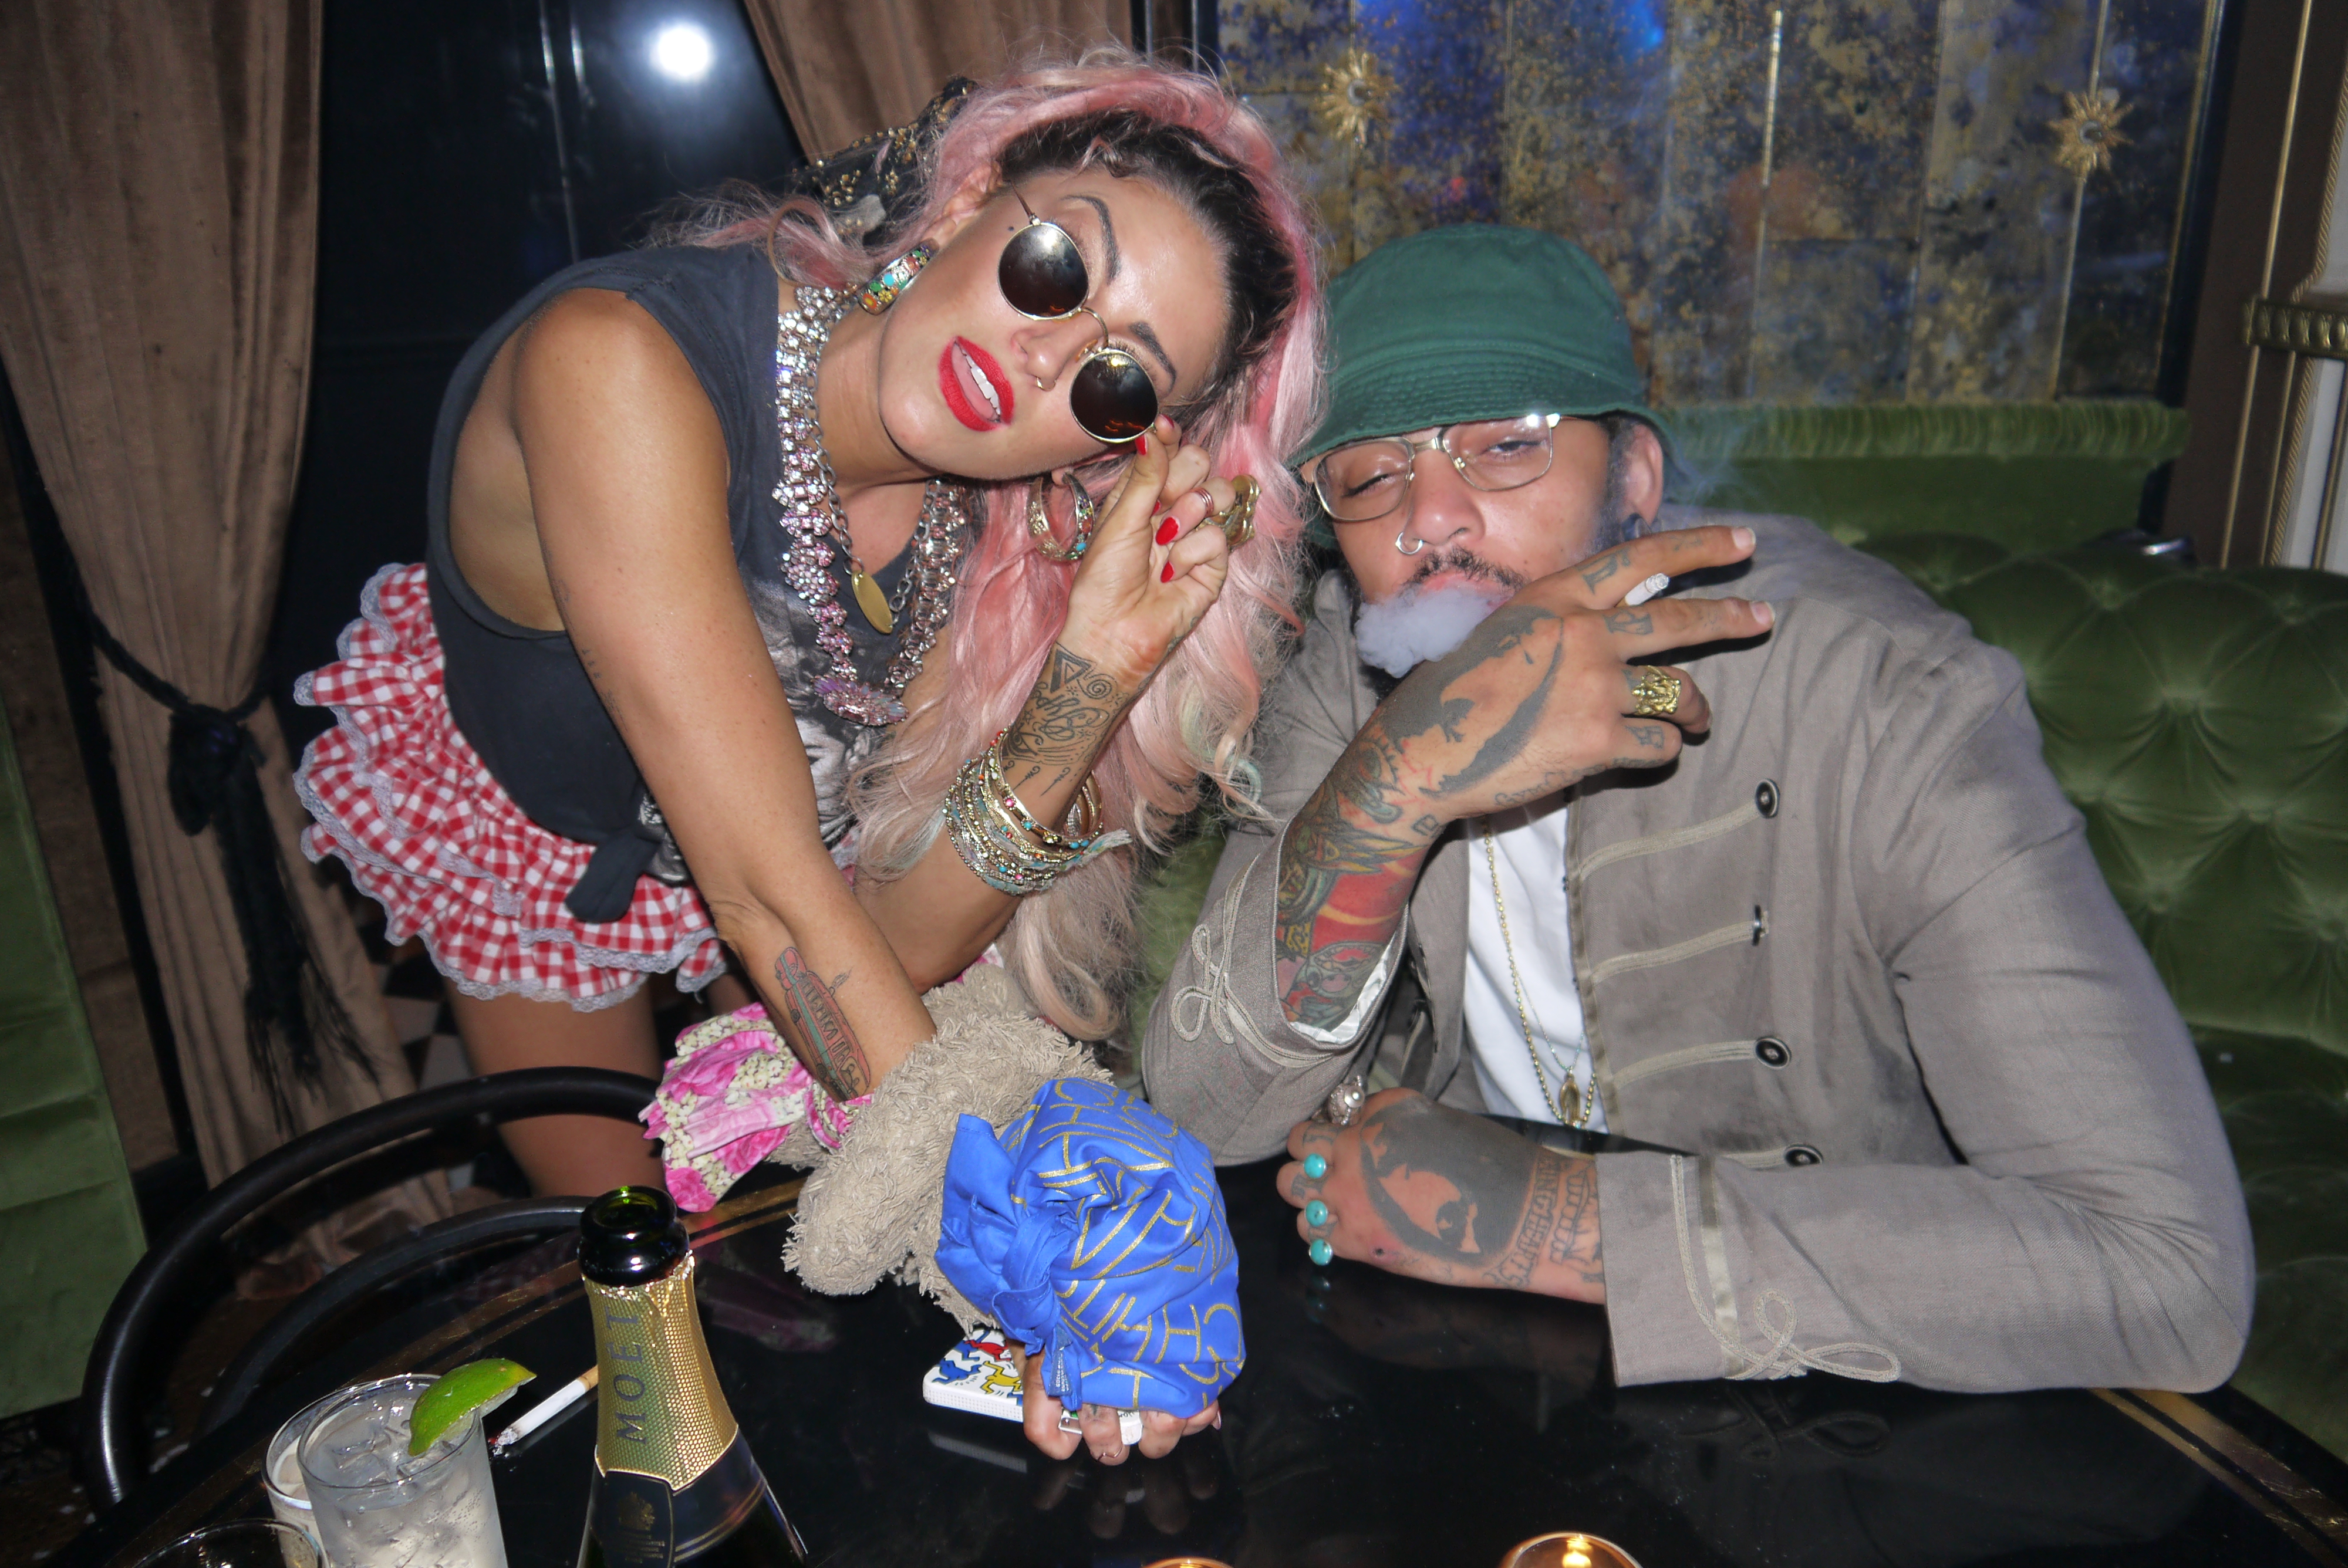 Neon Hitch & Travie Mccoy at the Galore party